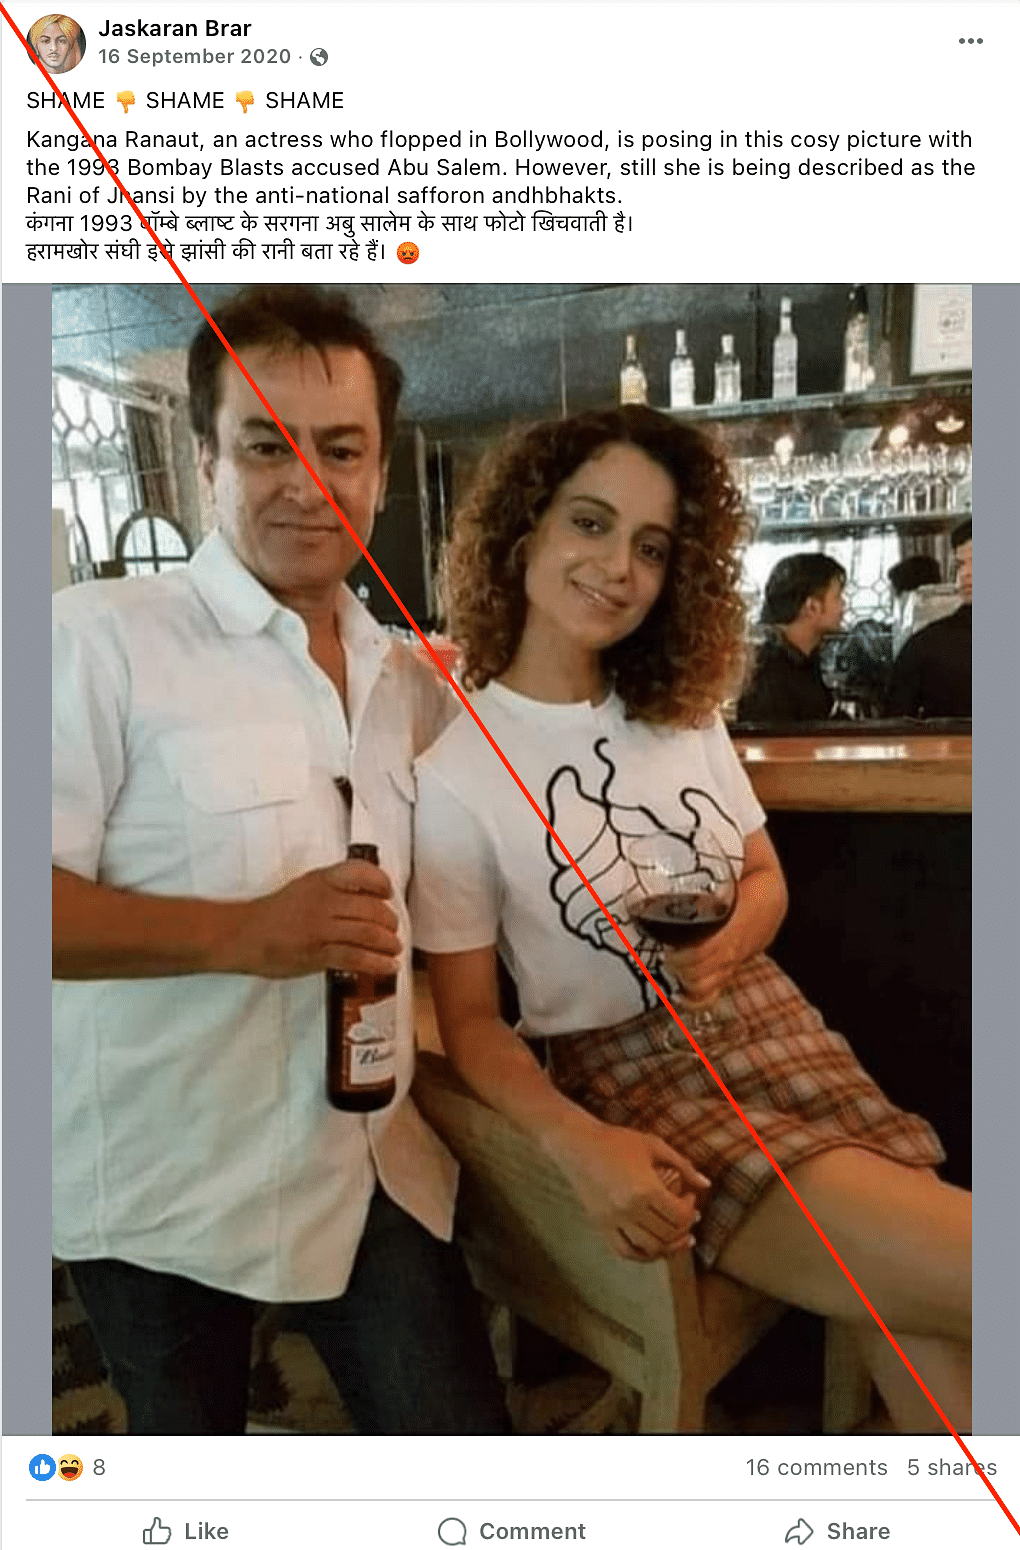 The man with Kangana Ranaut is Times of India's former entertainment editor Mark Manuel, not Abu Salem.